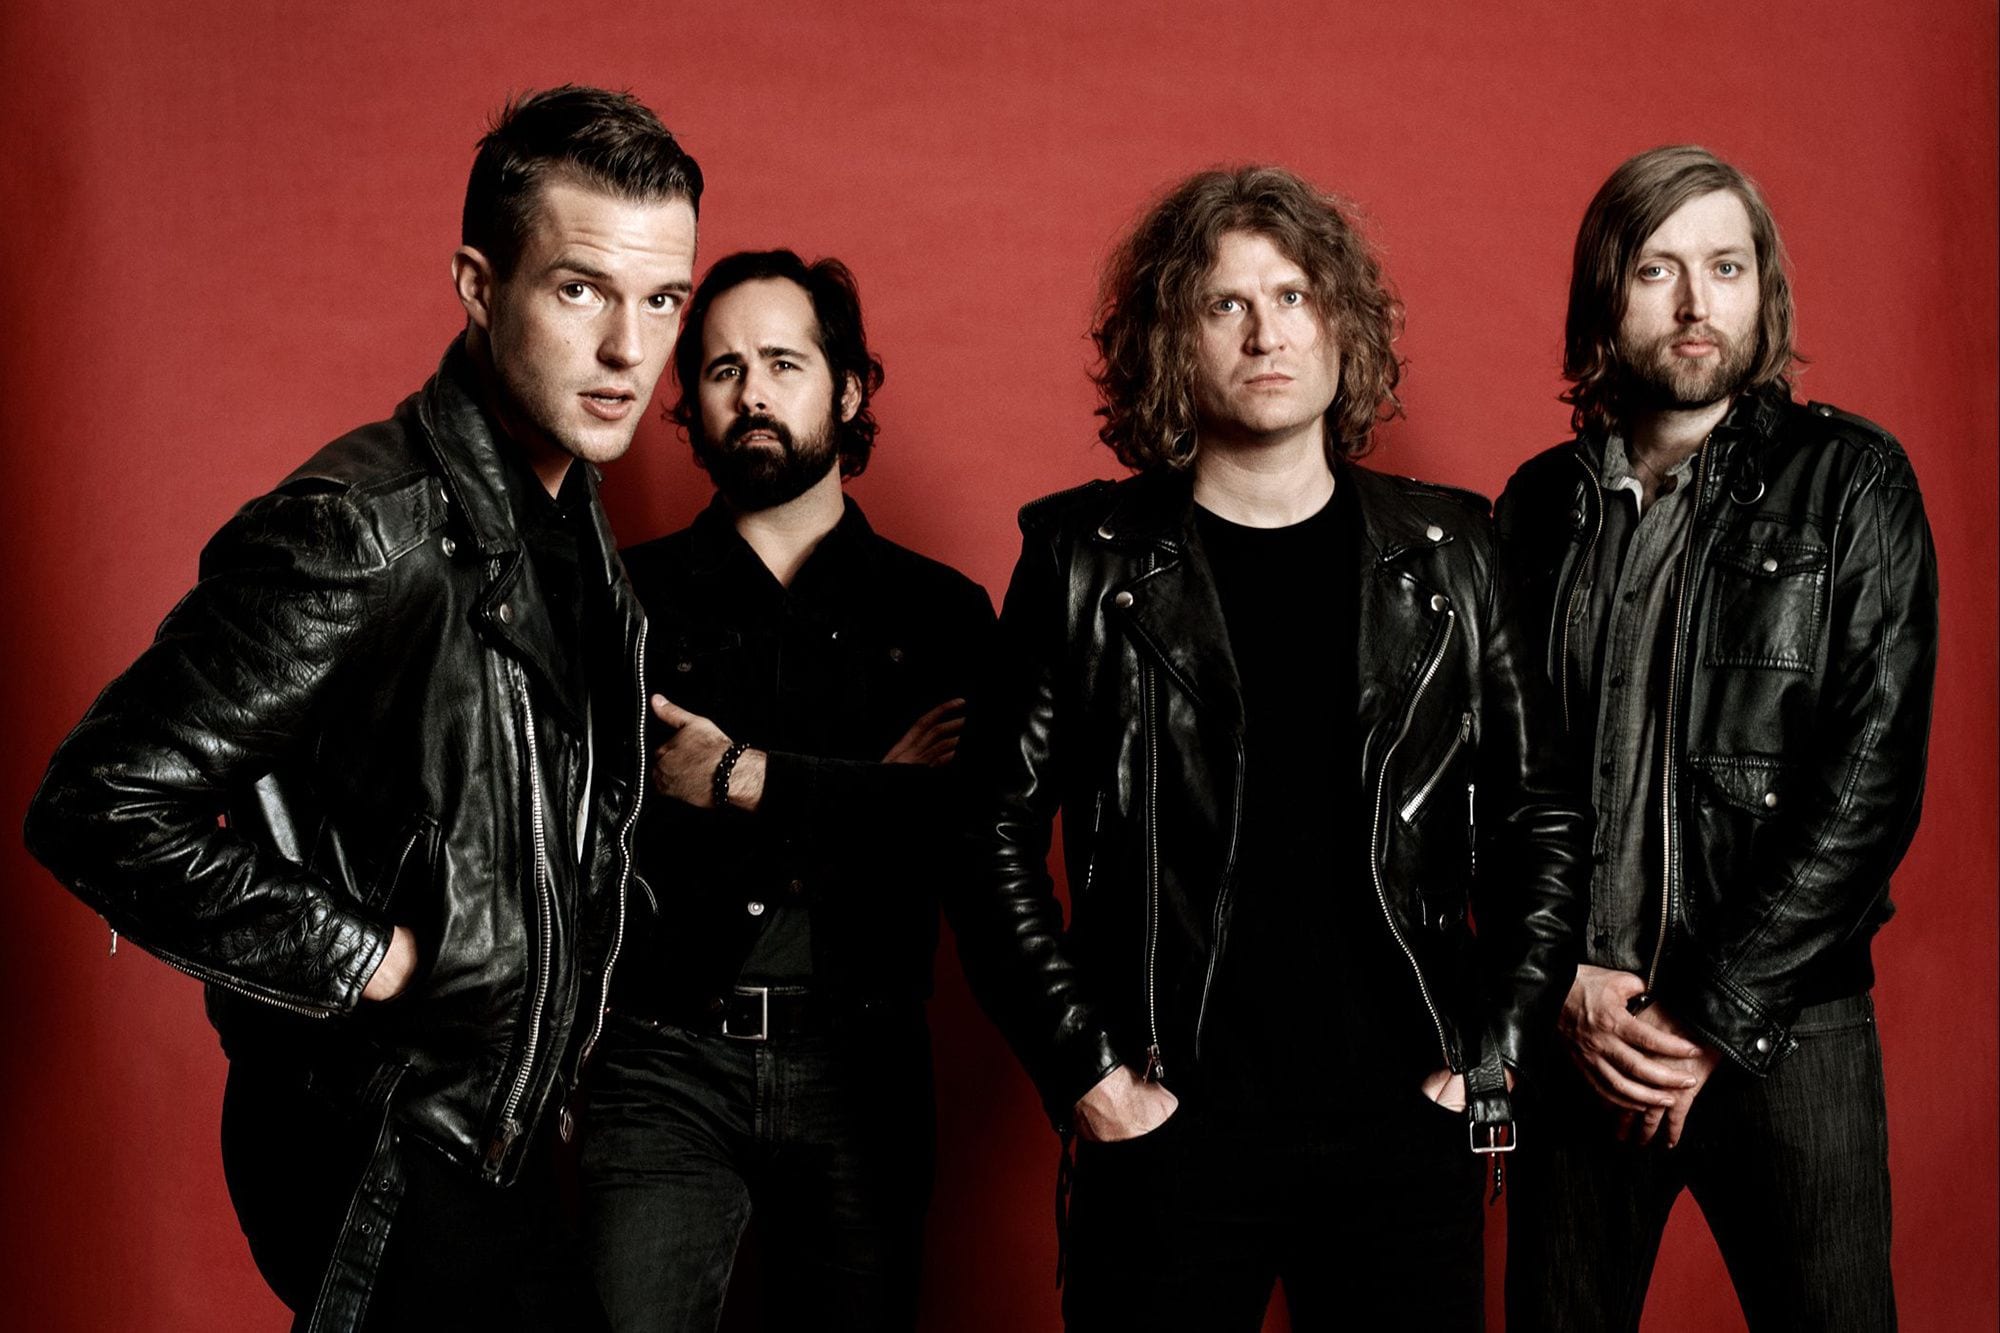 The Killers’ ‘Imploding the Mirage’ Promises Dynamite Rock Yet Delivers Tepid Synthpop